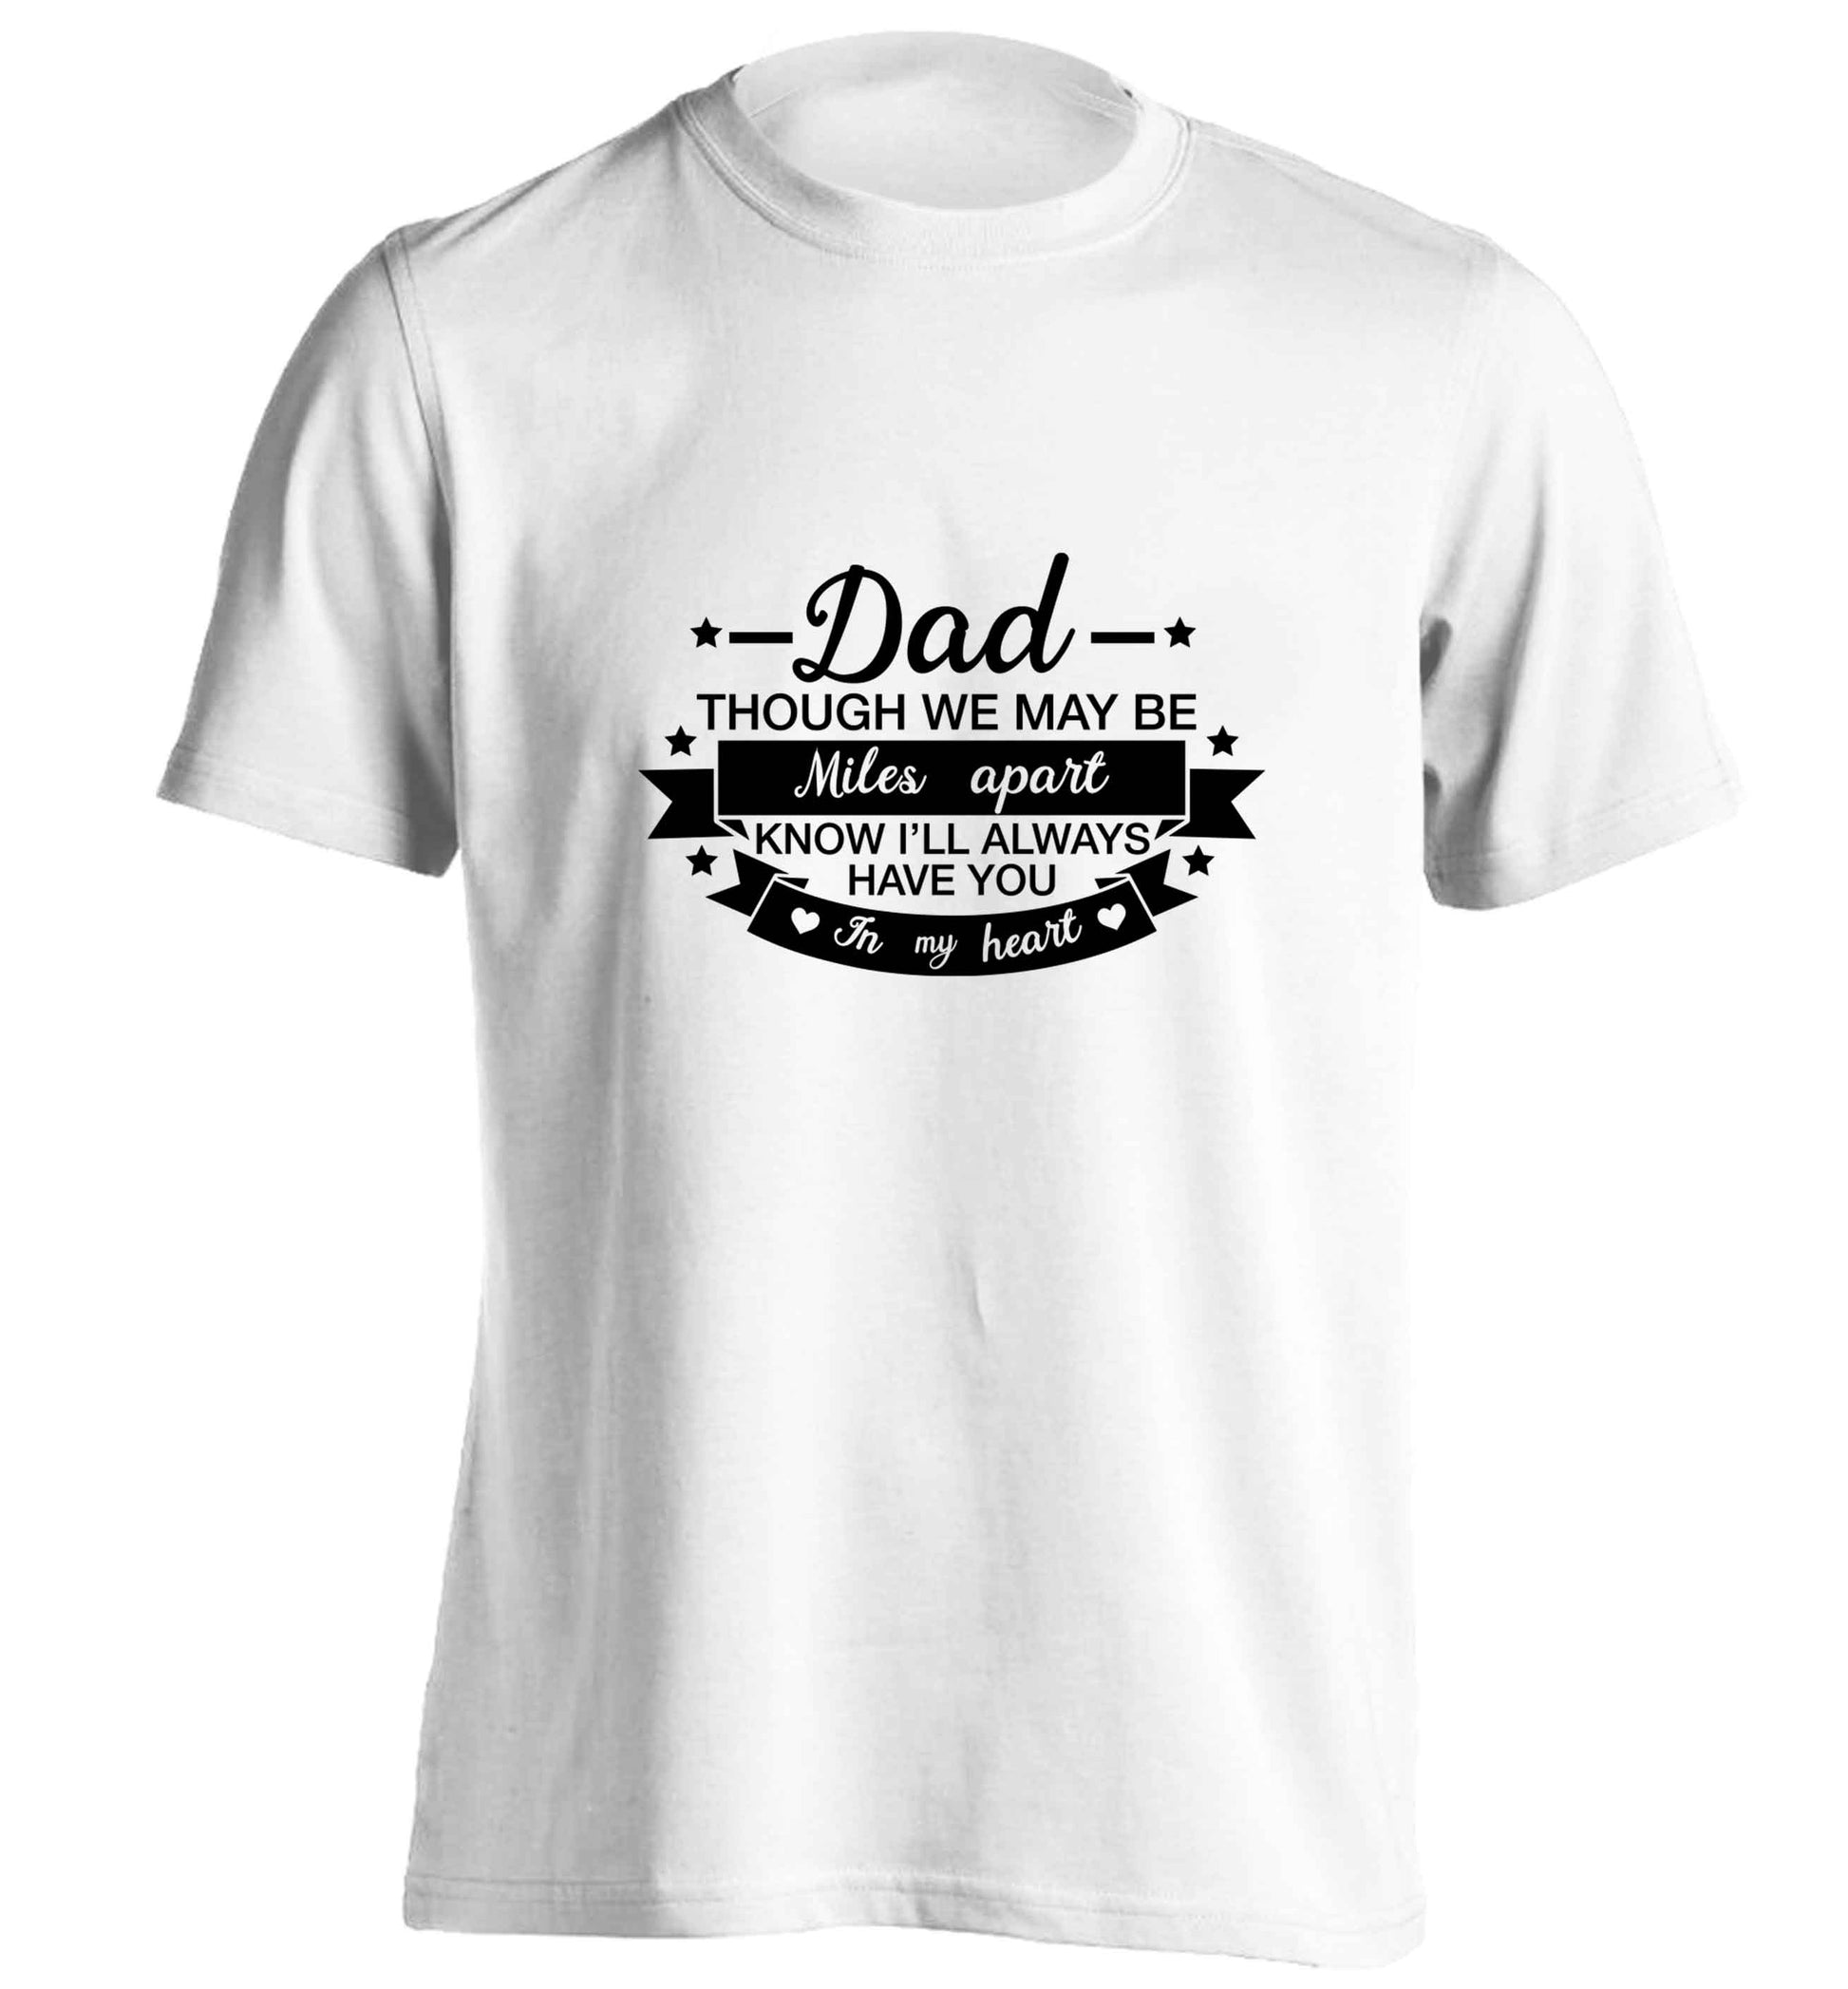 Dad though we are miles apart know I'll always have you in my heart adults unisex white Tshirt 2XL